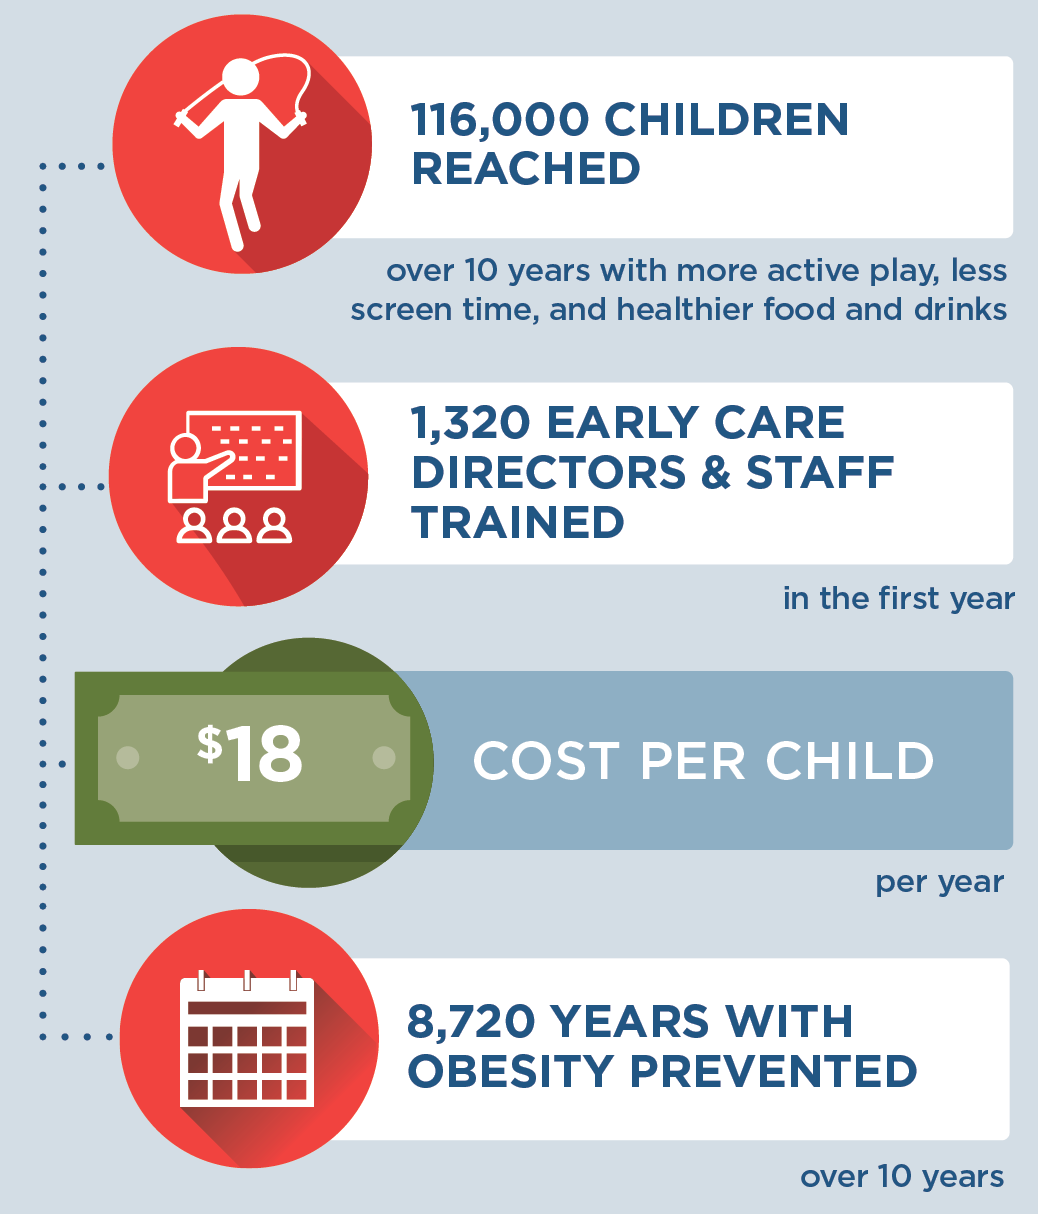 If NAP SACC was incorporated into Better Beginnings in Arkansas, then 116,000 children would be reached over 10 years with more active play, less screen time, and healthier food and drinks. 1,320 early care directors and staff would be trained in the first year. It would cost $18 per child per year to implement. 8,720 years with obesity would be prevented over 10 years.